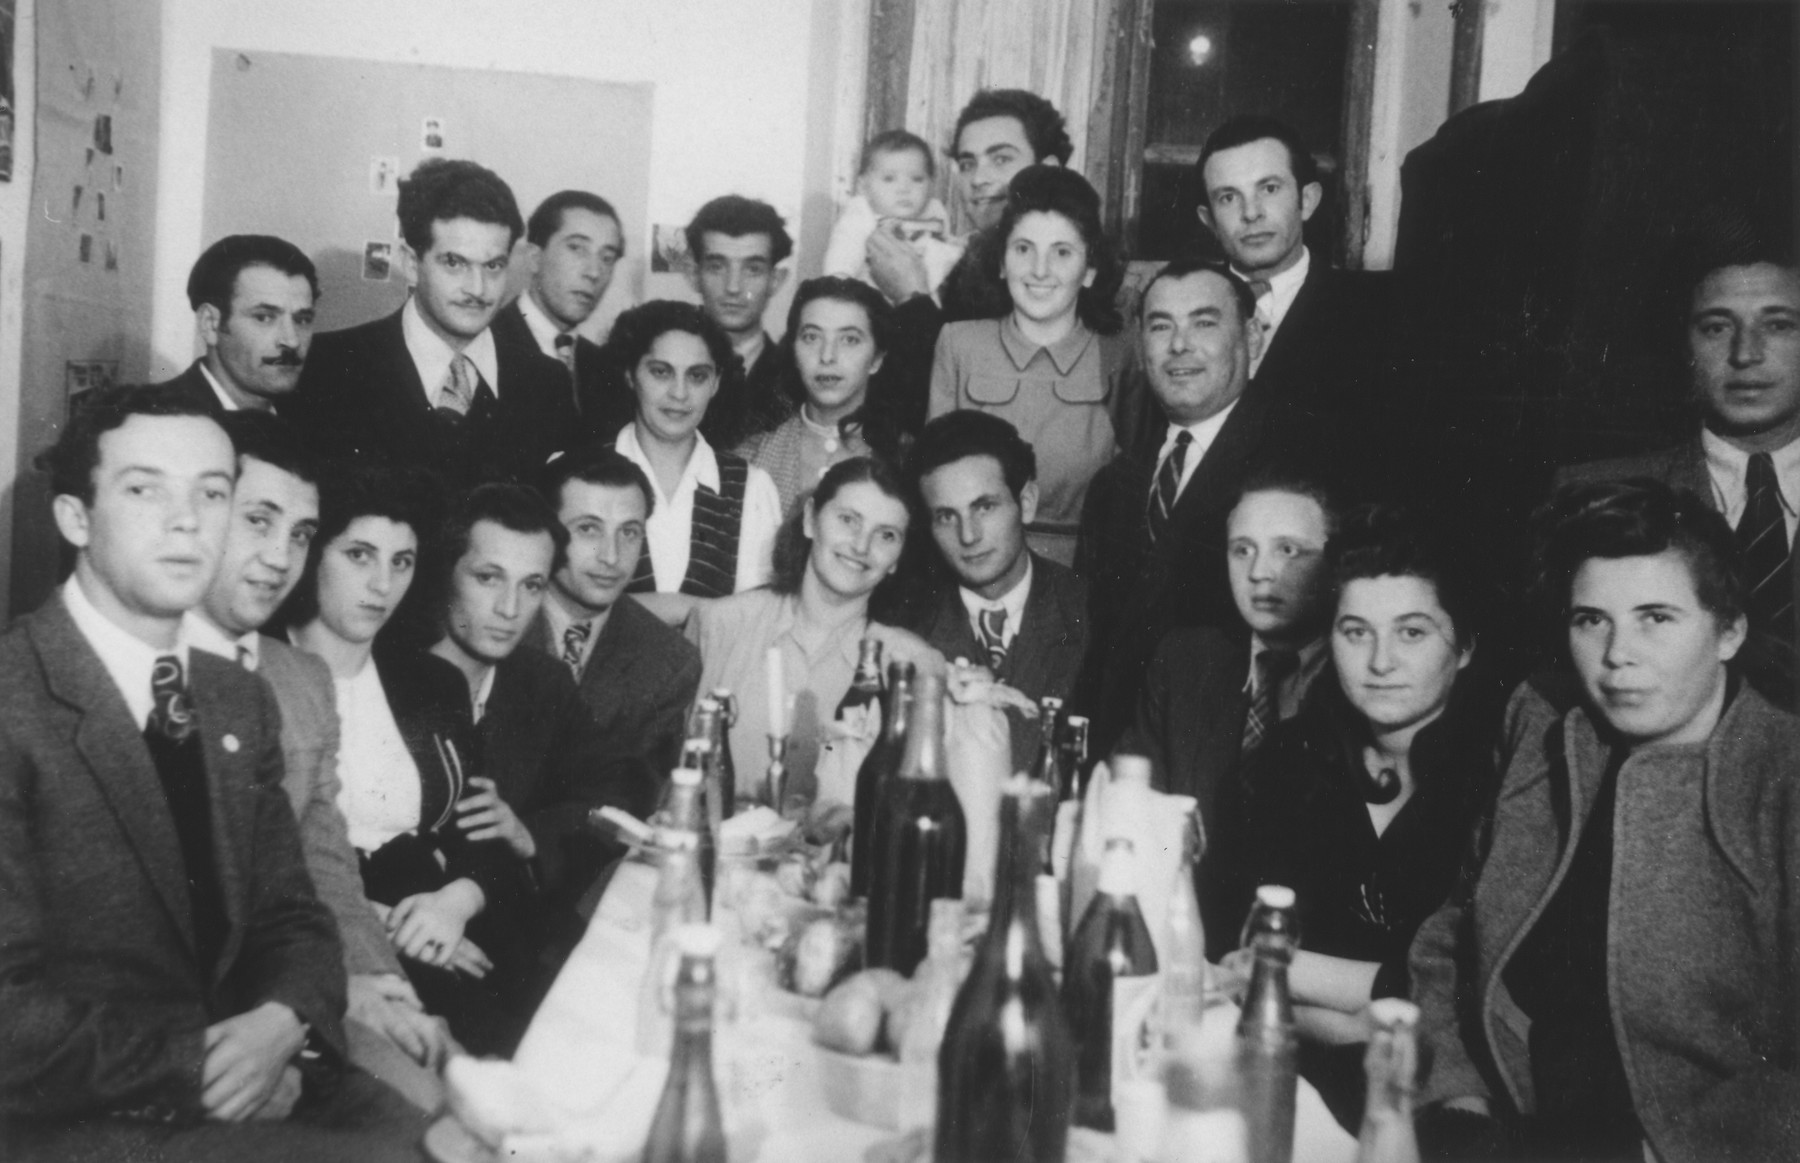 A group of friends celebrates the wedding of  Jacob and Miriam Schwimmer in the Bari dispaced persons camp. 

Among those pictured is Jerome (Jacob) Hollander, seated second from the left.